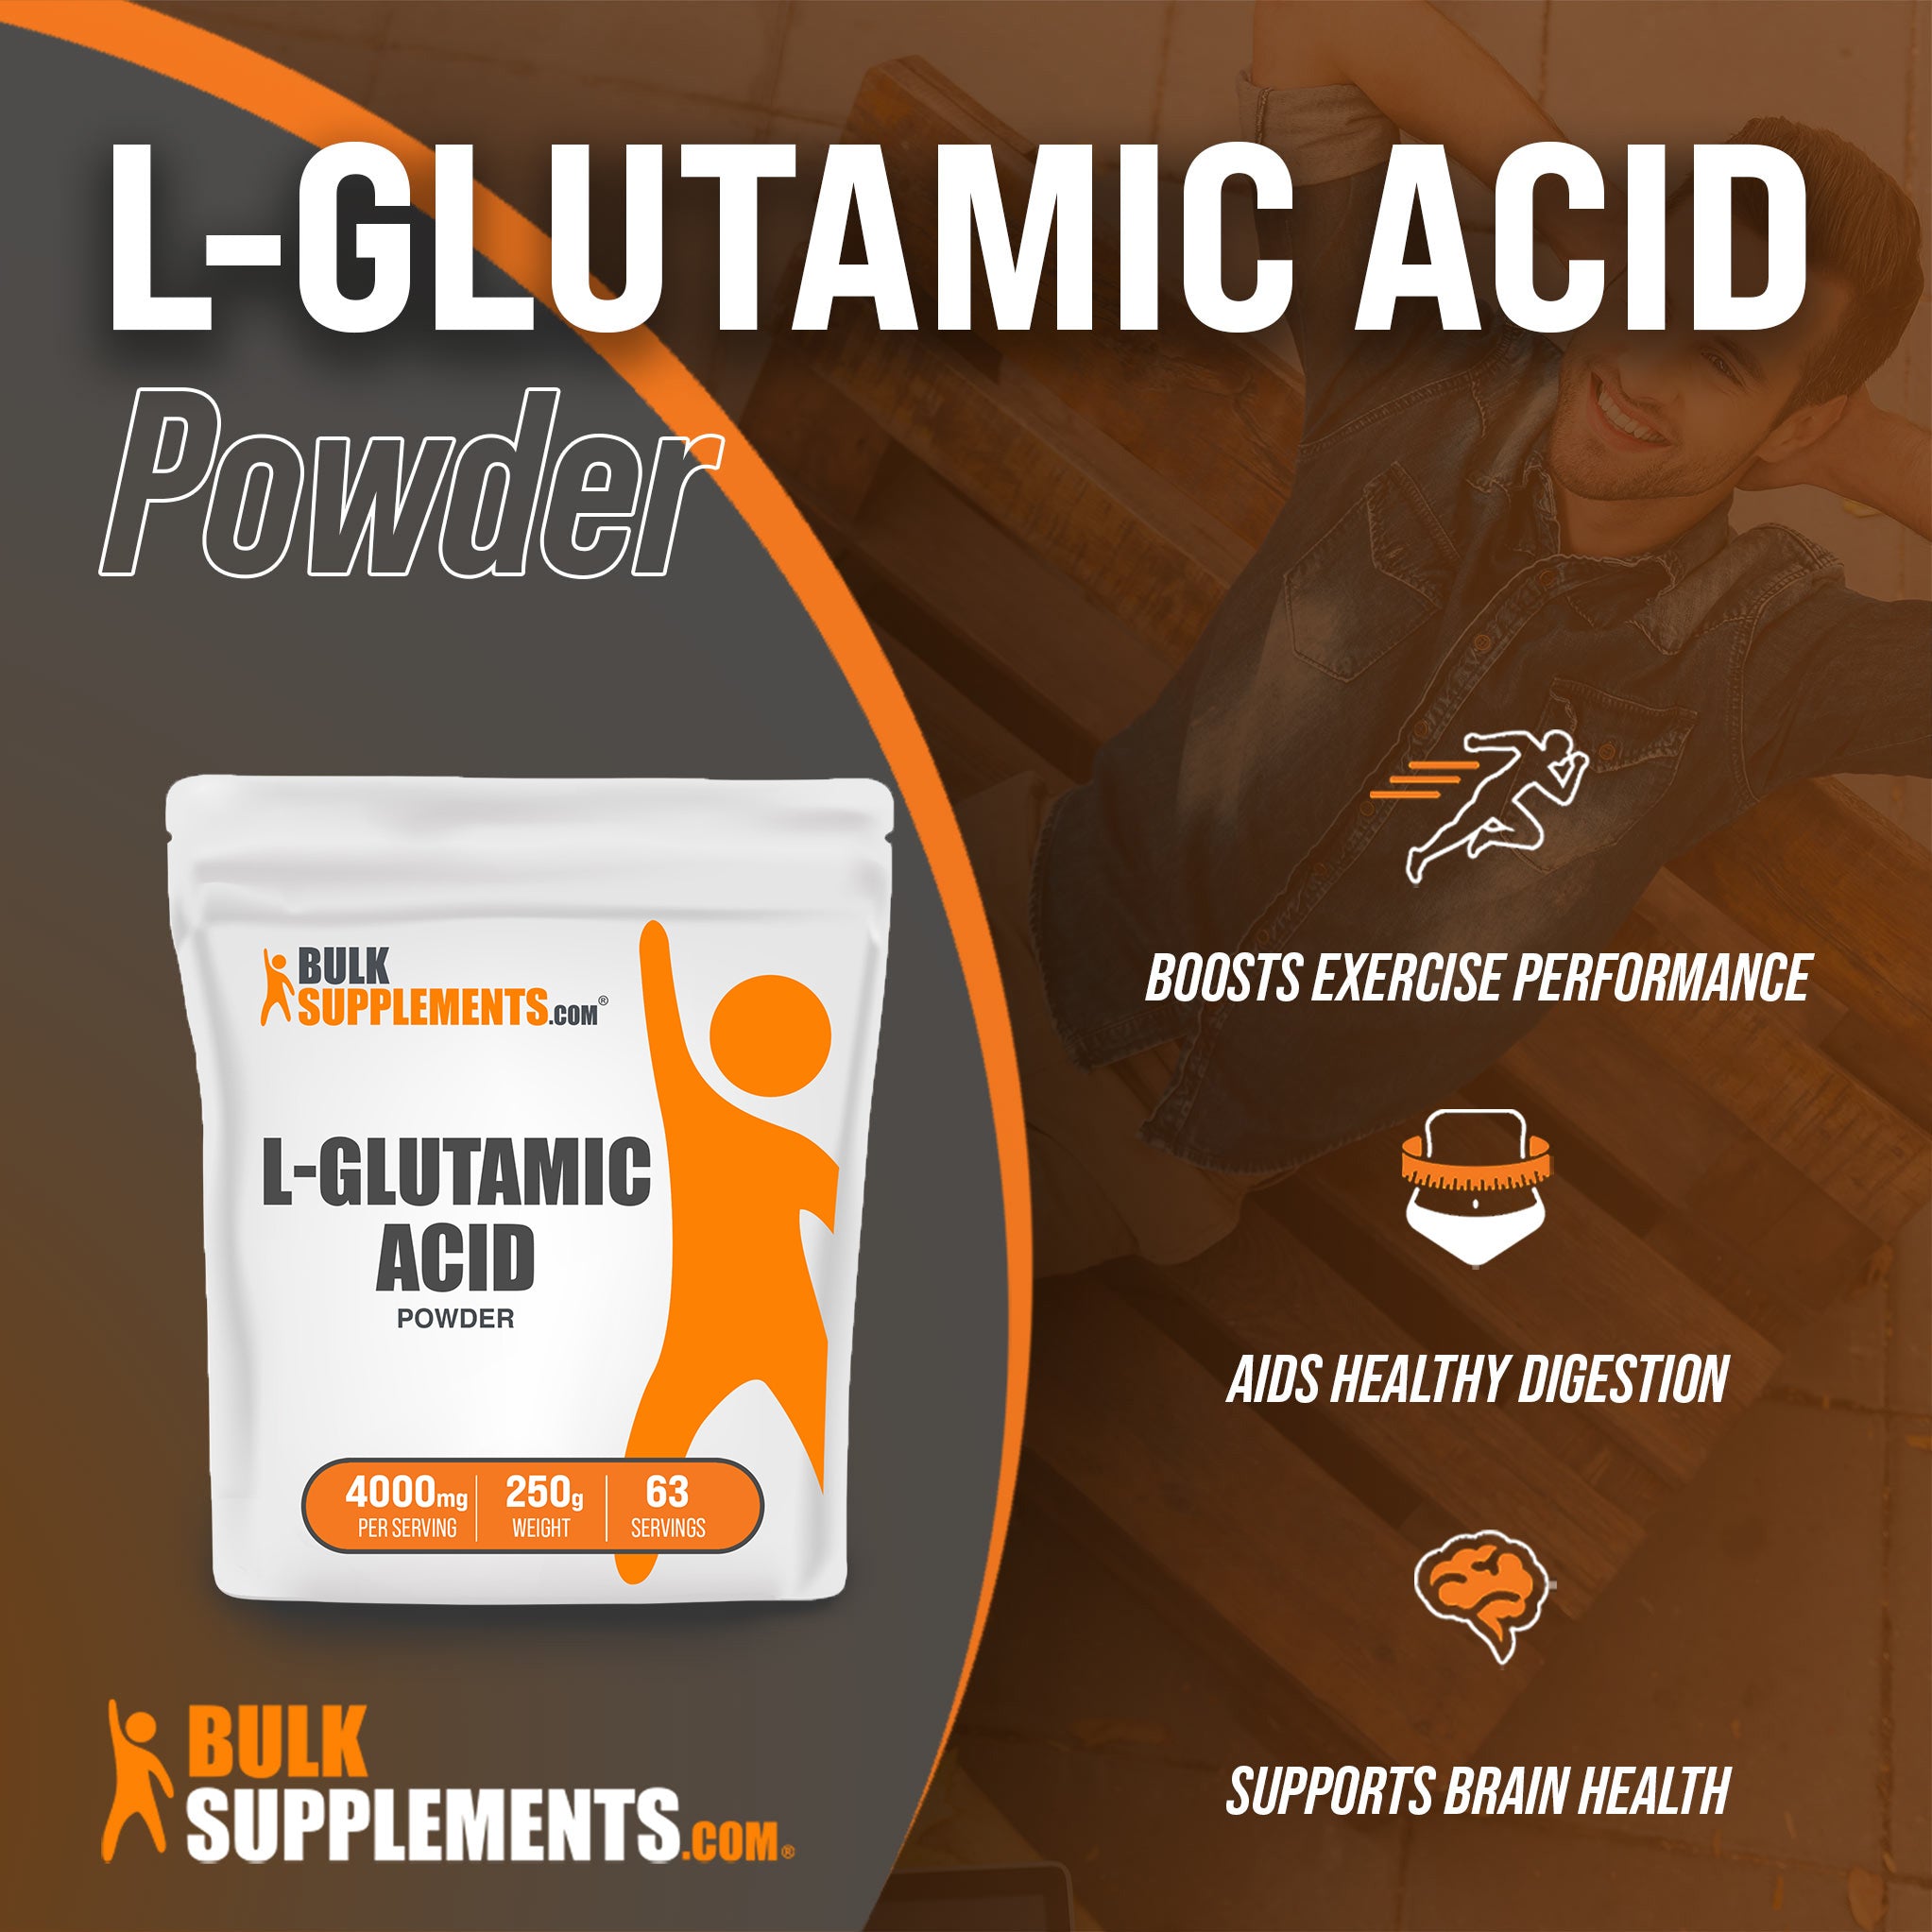 Benefits of L-Glutamic Acid: boosts exercise performance, aids healthy digestion, supports brain health